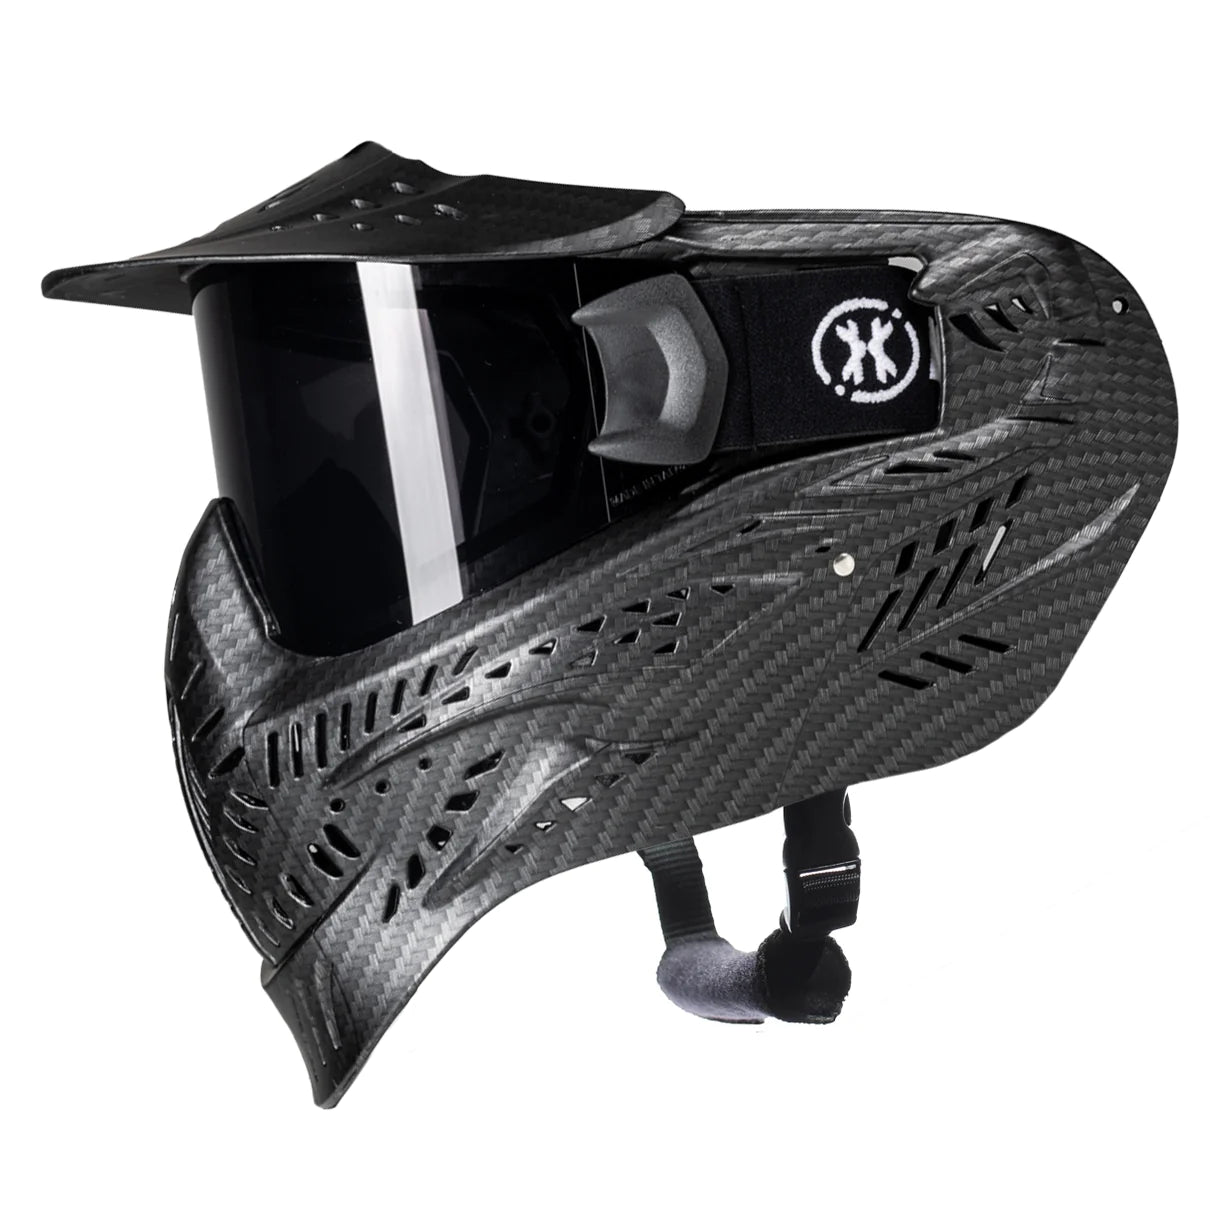 HSTL Goggle | Carbon Fiber | Paintball & Airsoft Goggle